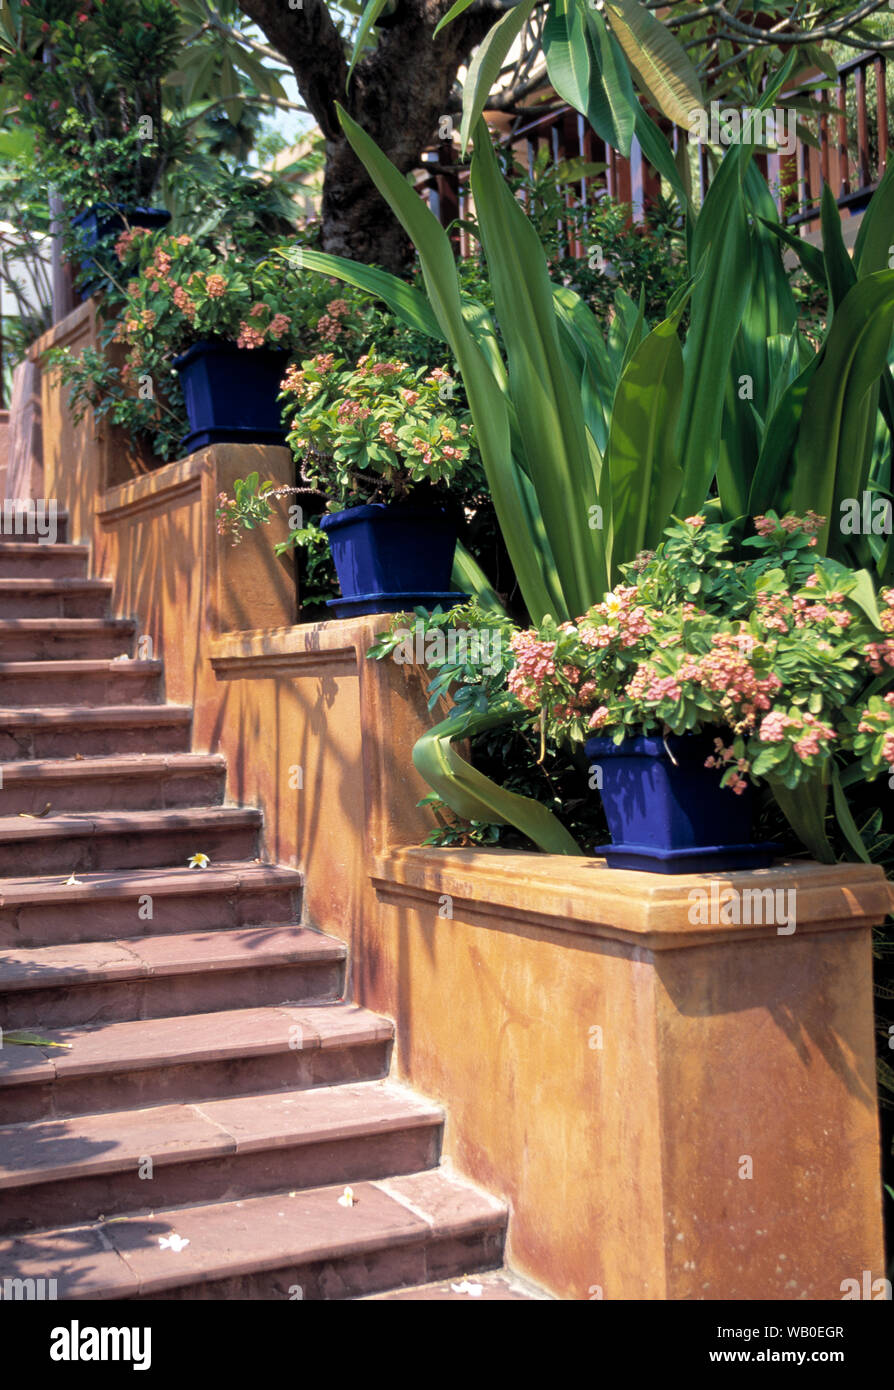 india, garden steps with colourful flower pots lining the structure Stock Photo